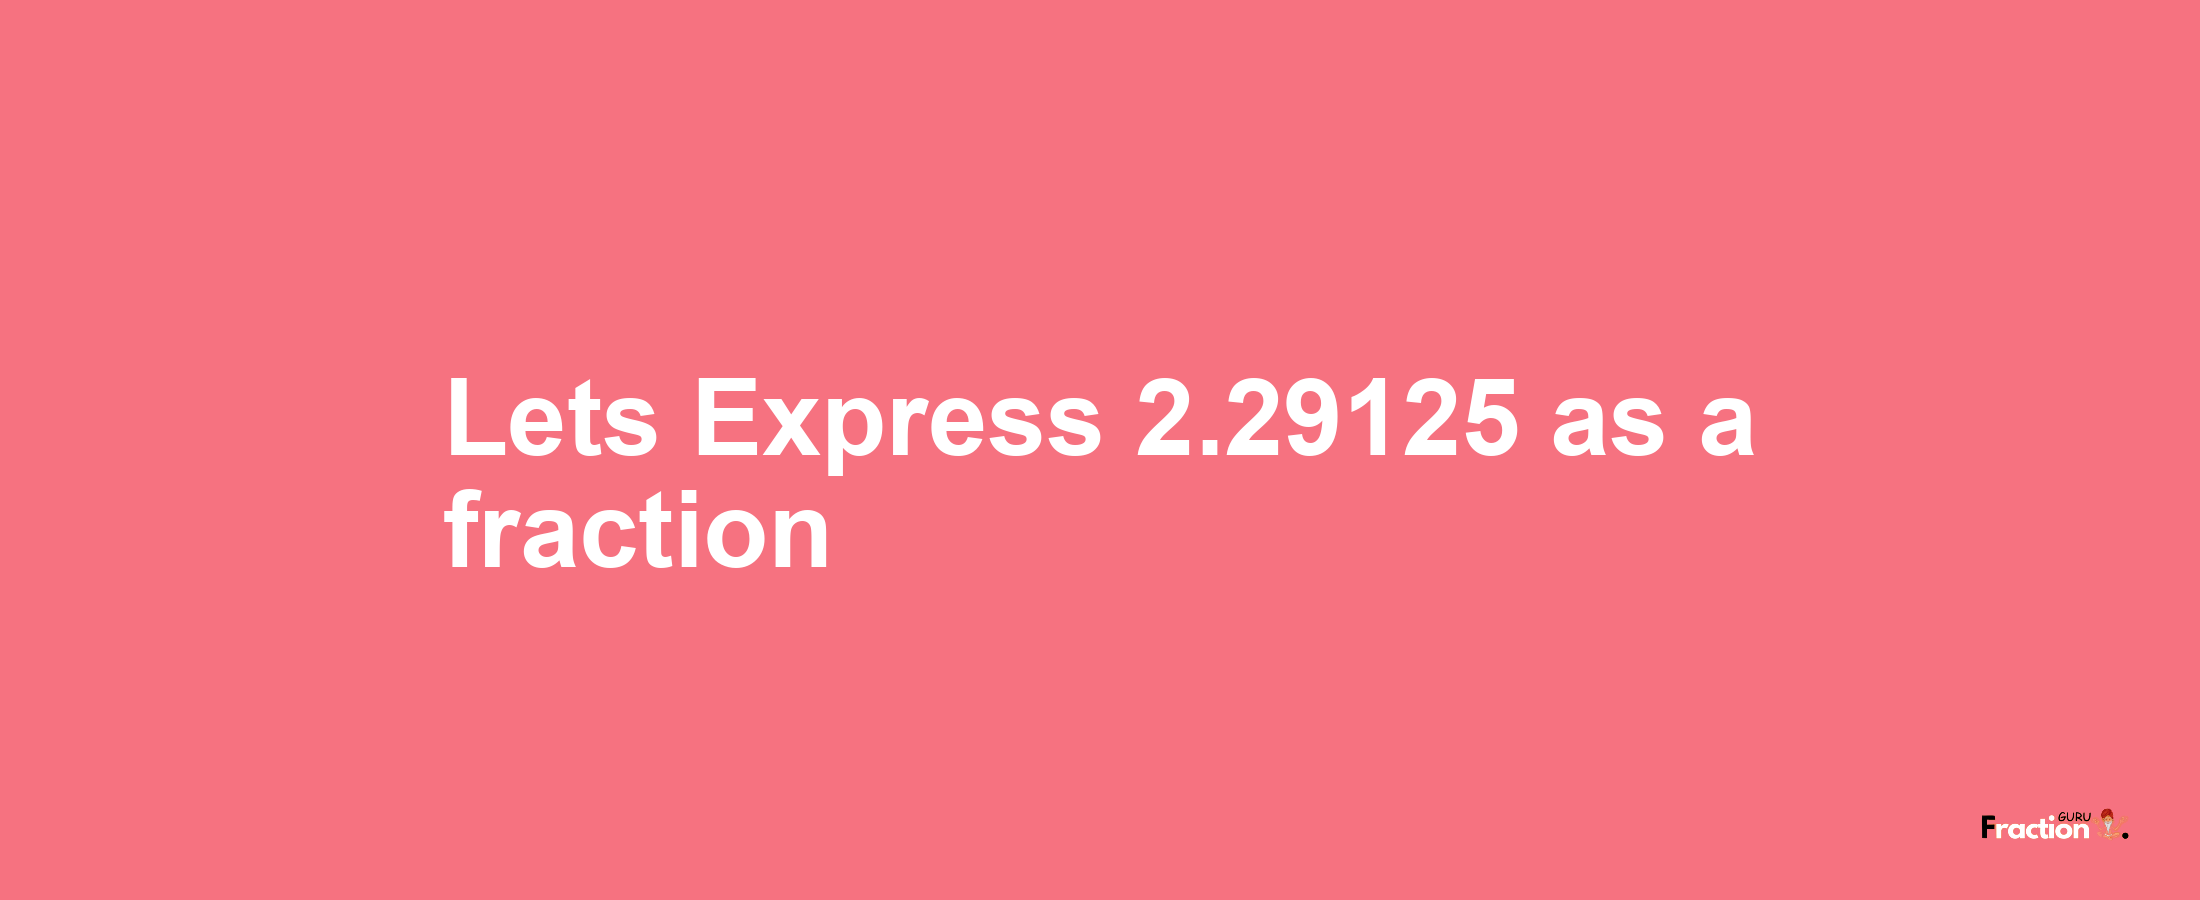 Lets Express 2.29125 as afraction